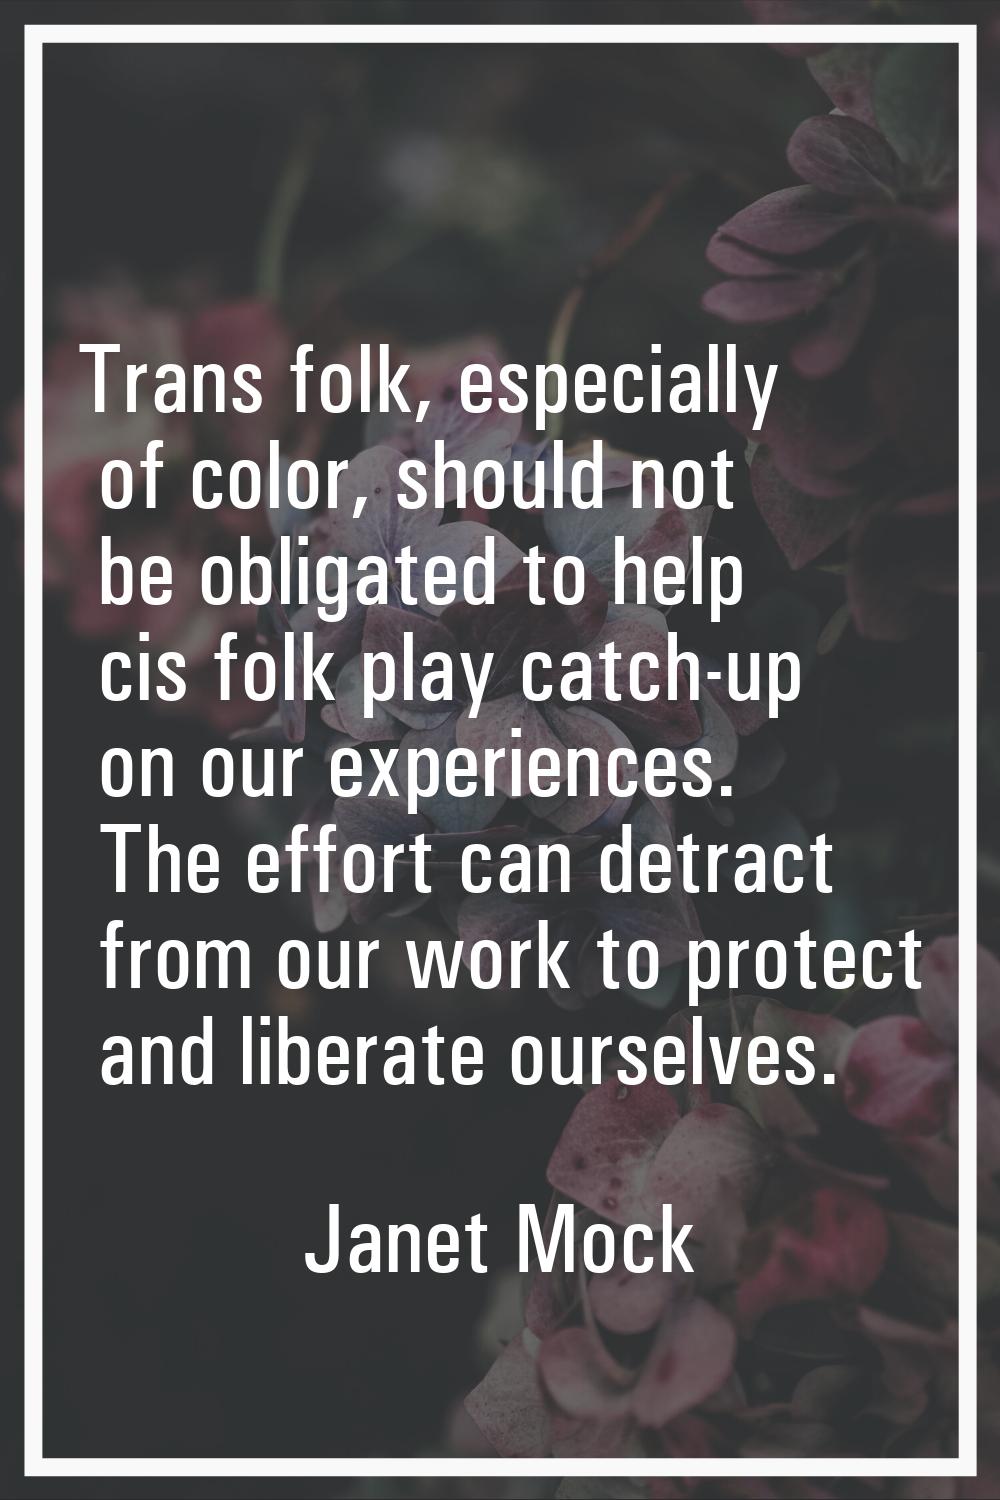 Trans folk, especially of color, should not be obligated to help cis folk play catch-up on our expe